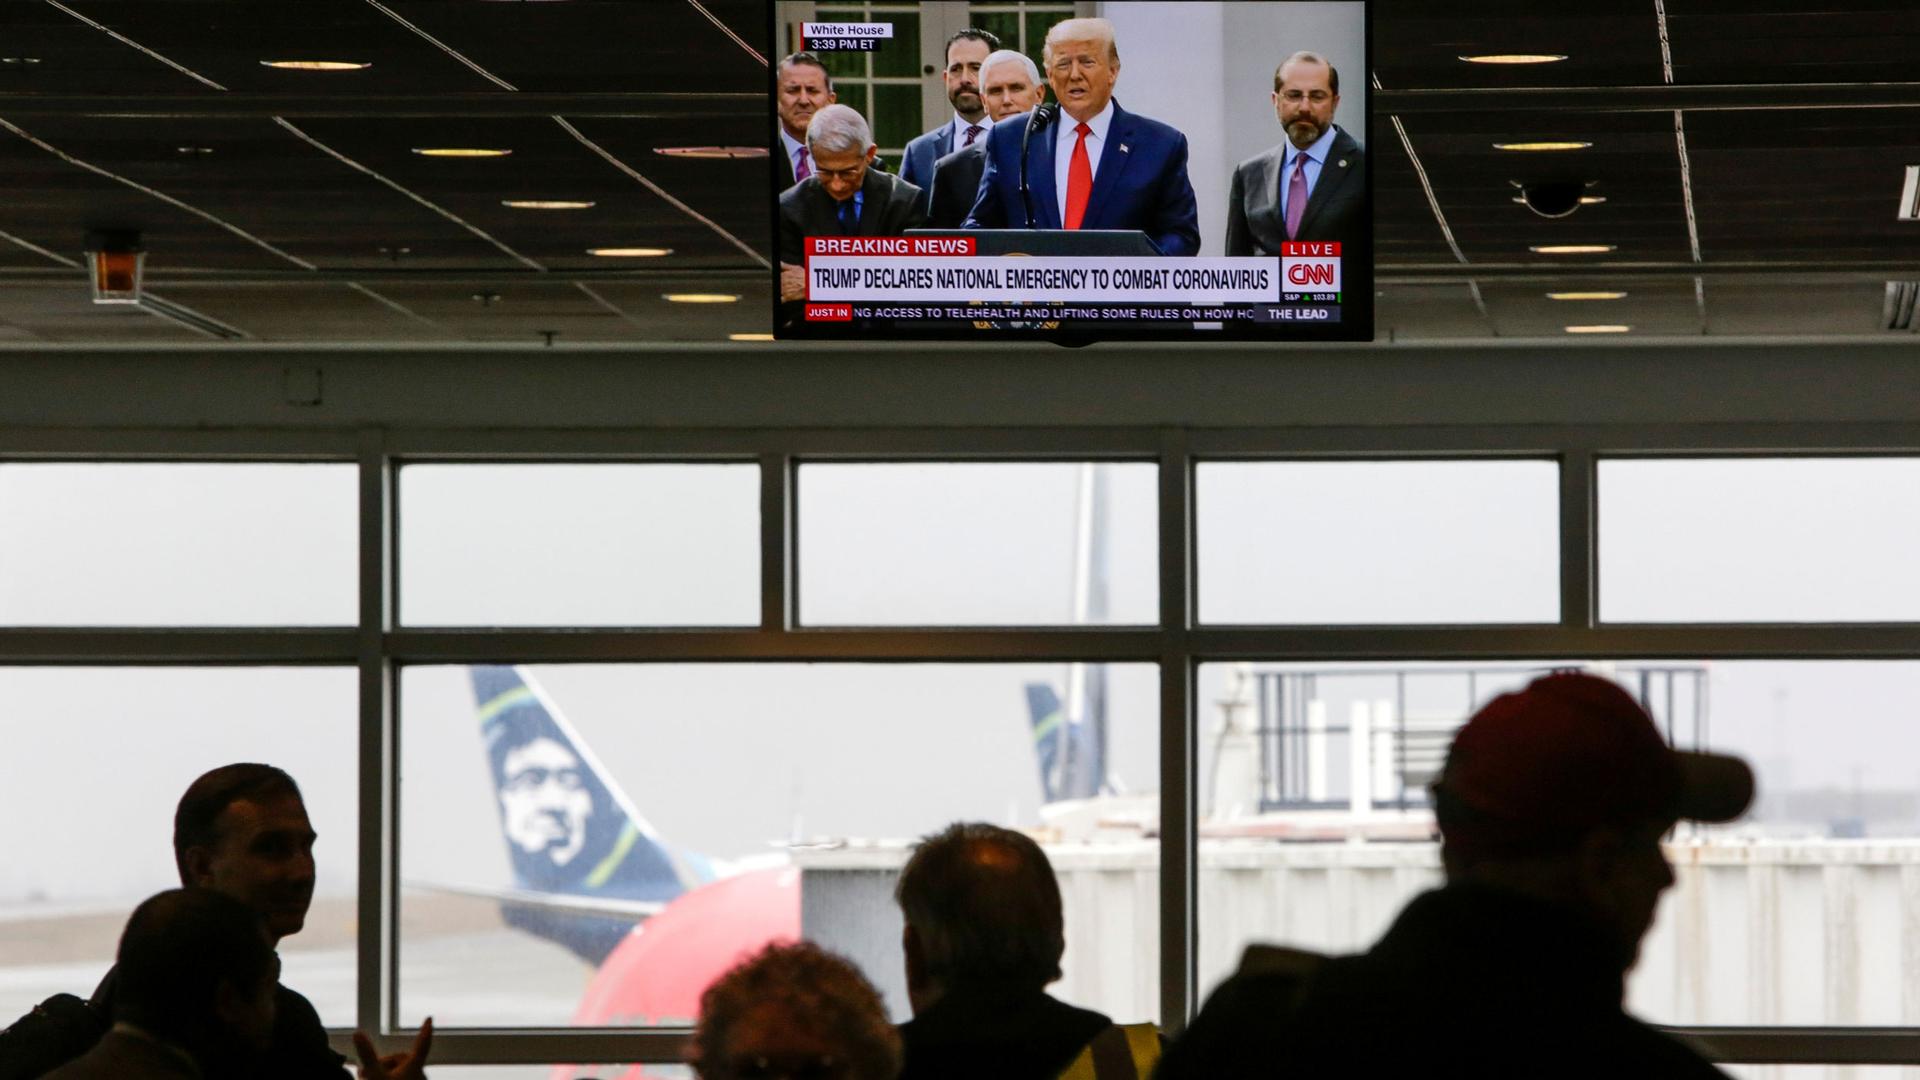 A television is shown hanging from the ceiling with US President Donald Trump displayed while several people are in shadow below.